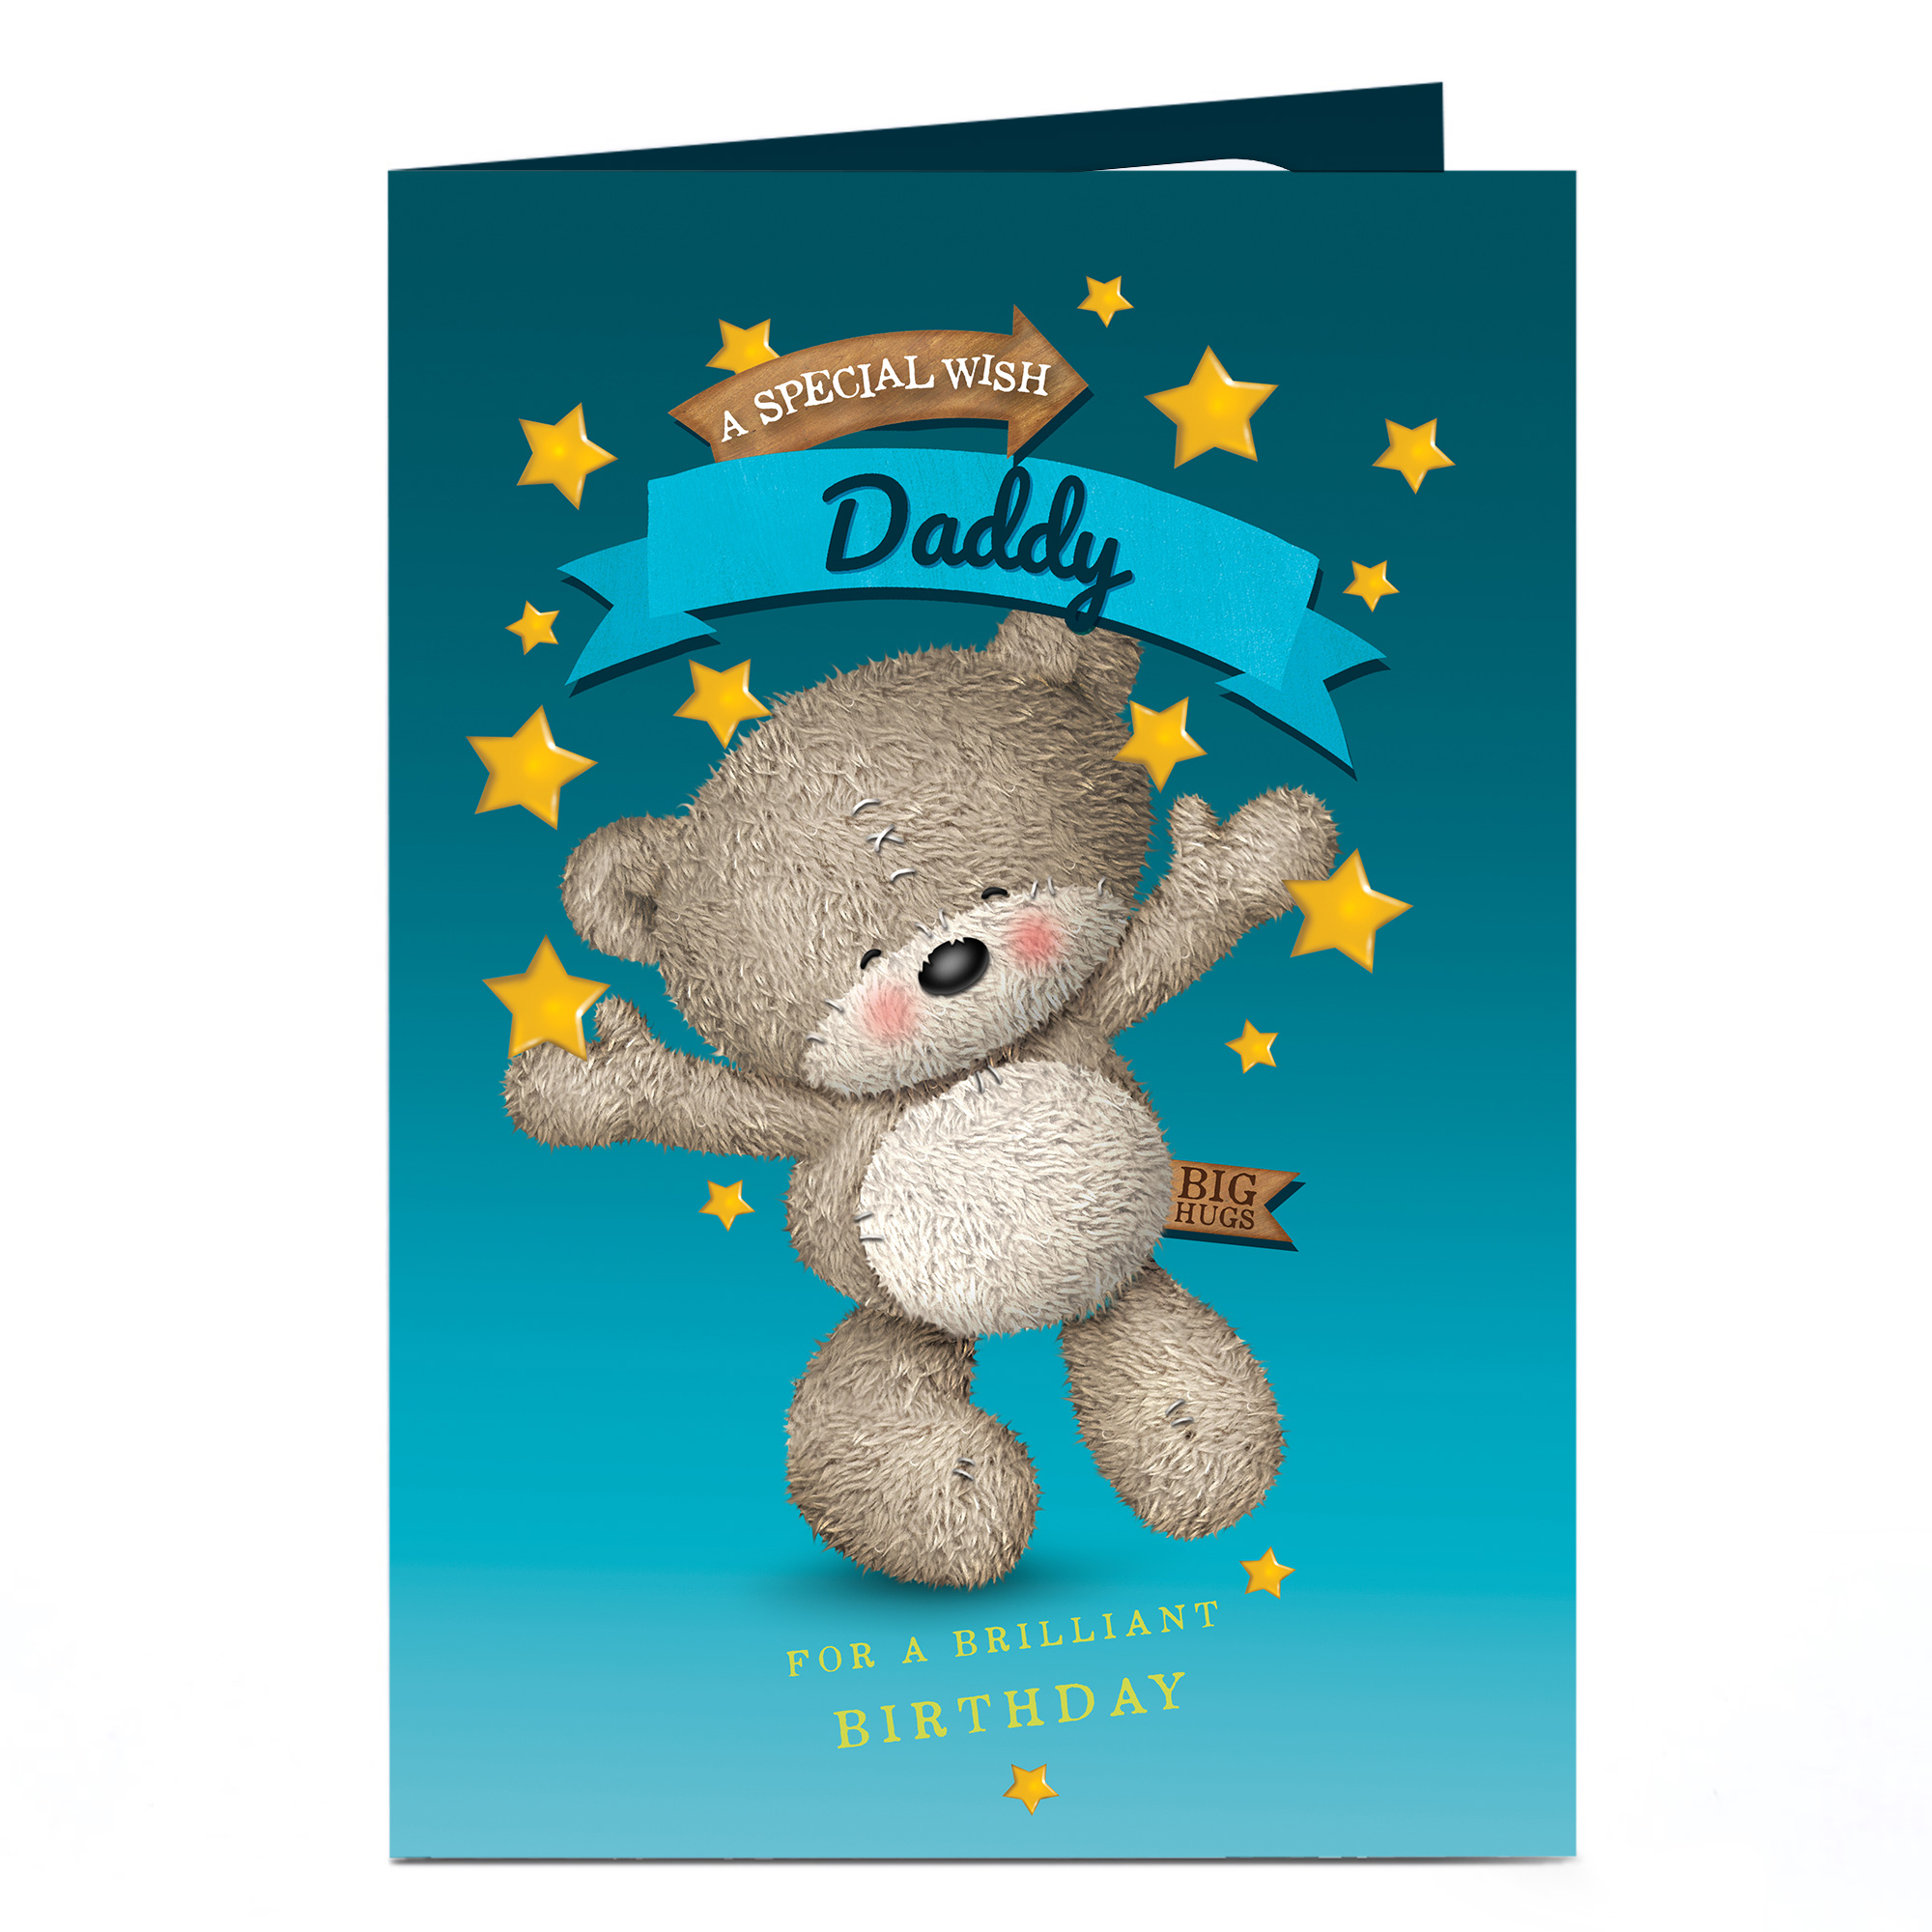 Personalised Hugs Birthday Card - A Special Wish